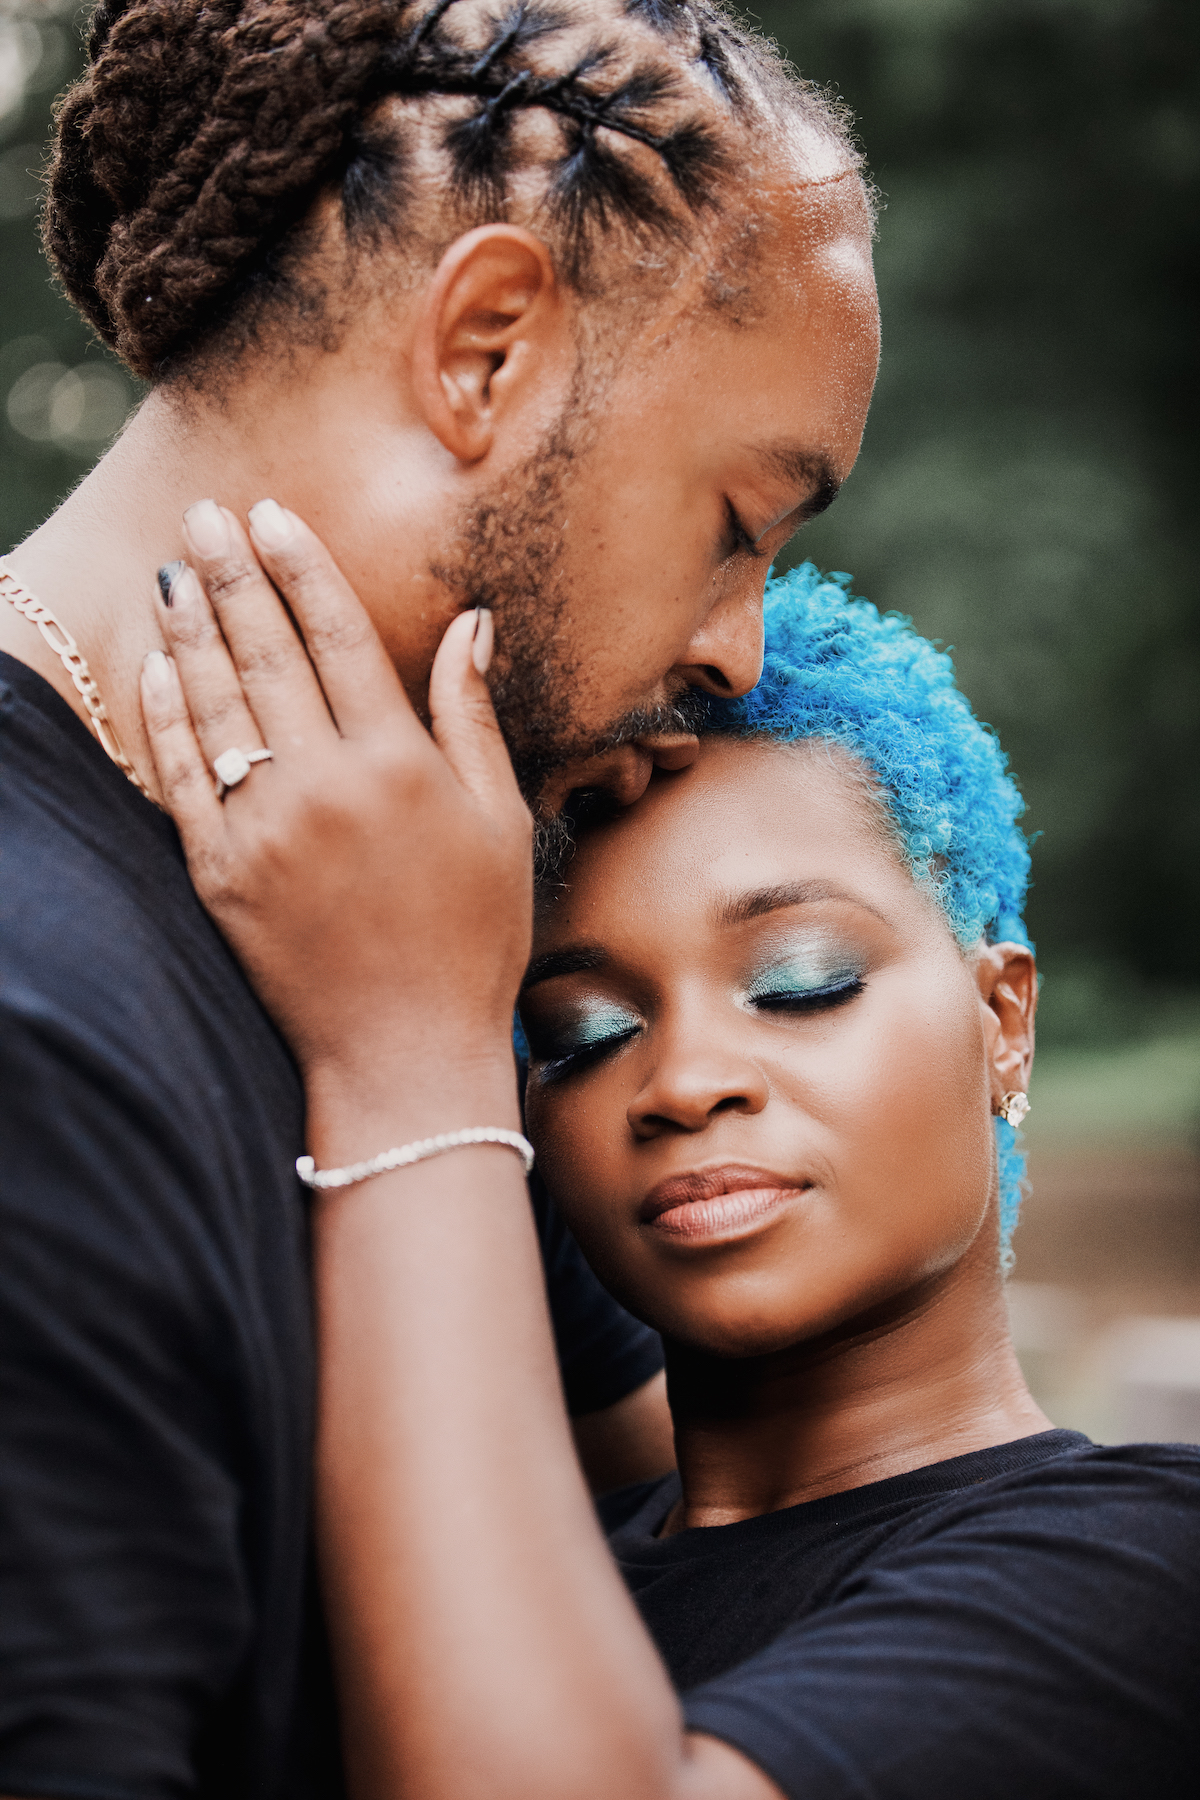 This black excellence-inspired engagement shoot at Great Falls National Park has 3 sexy outfits & blue-dyed natural hair for the bride-to-be.